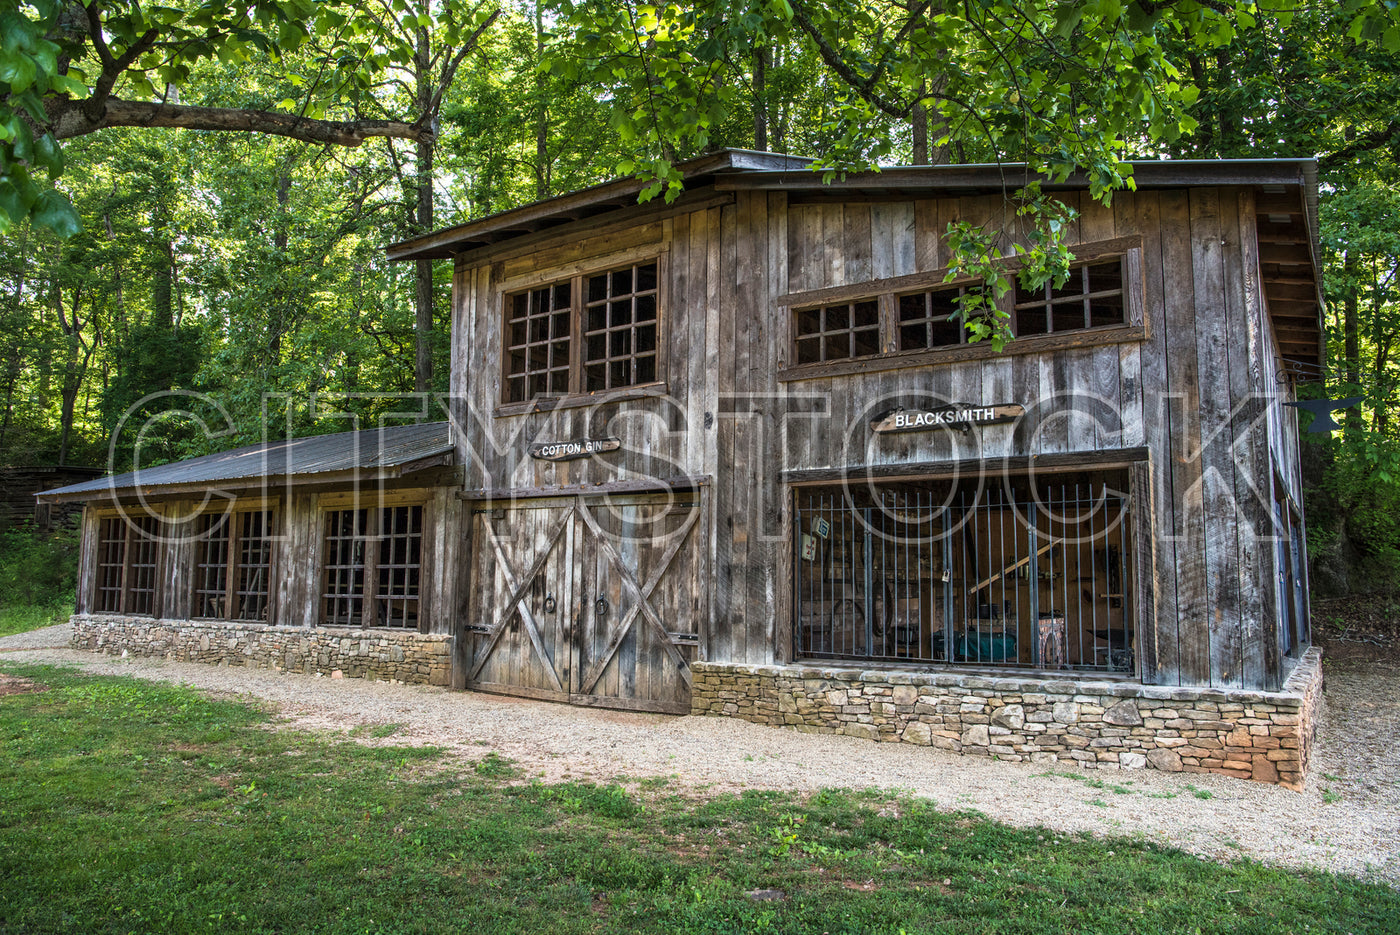 Historical blacksmith and cotton gin workshop in Pickens, South Carolina